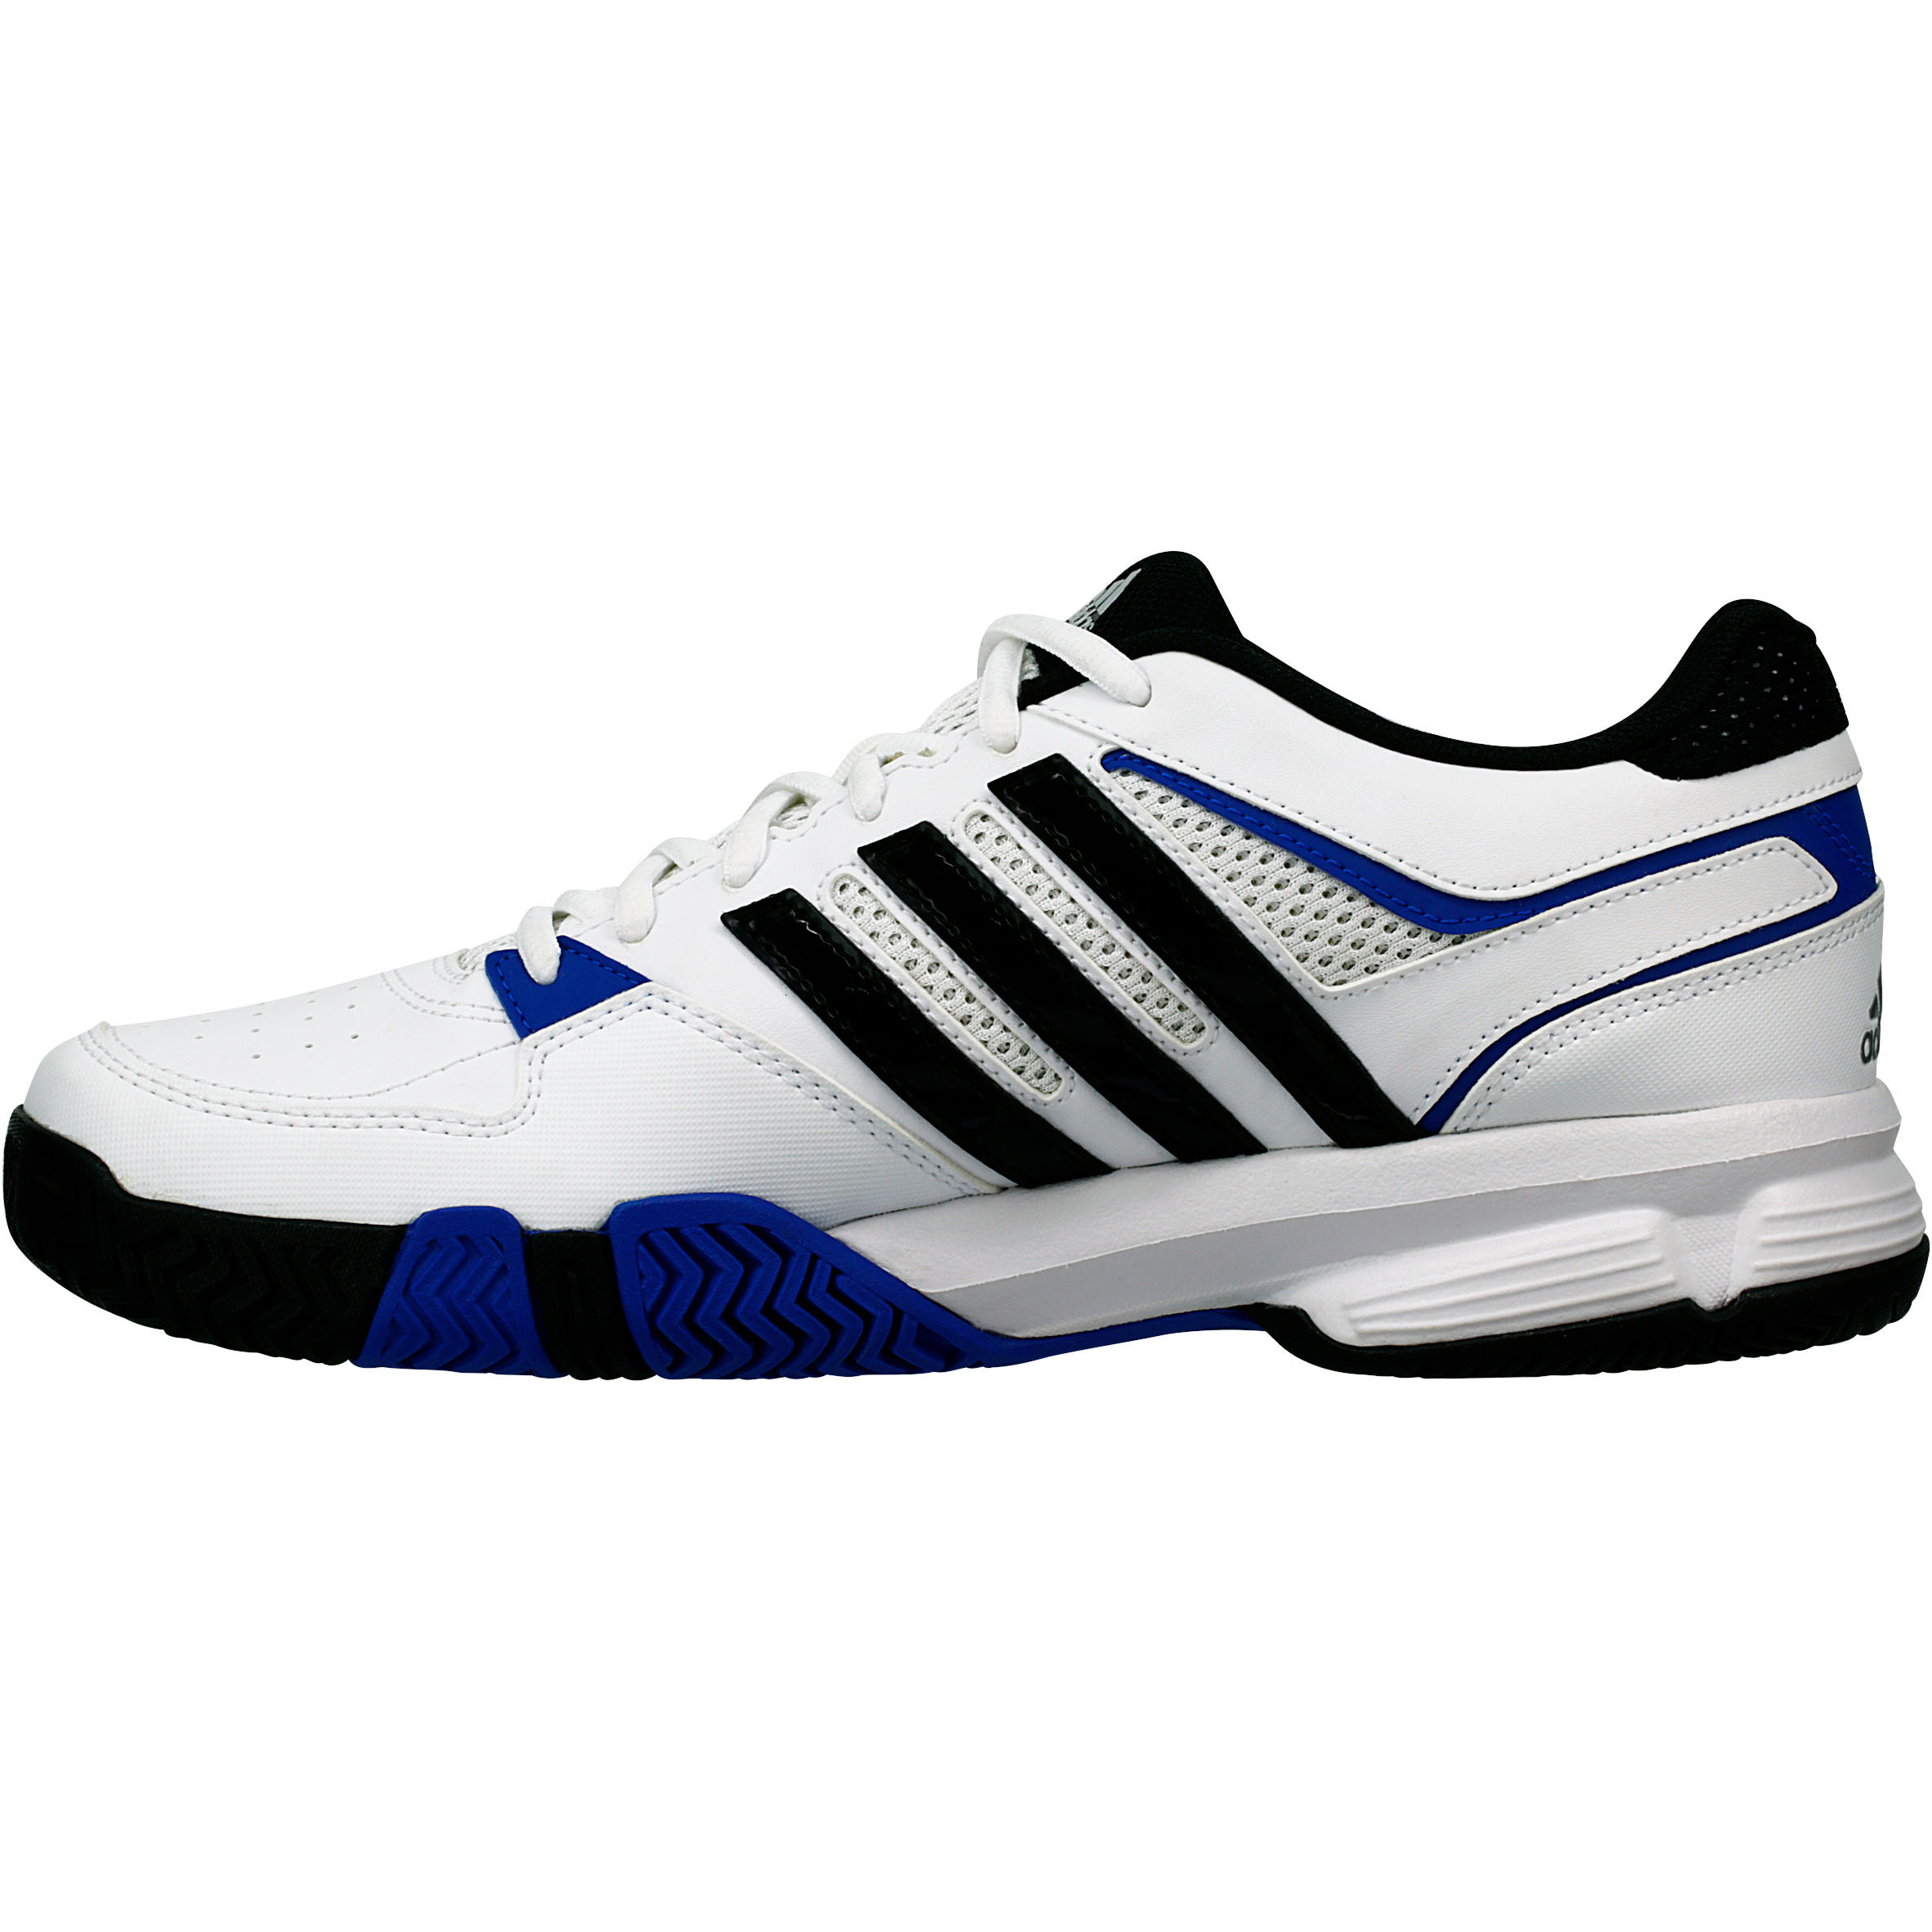 adidas fast court 2 - 62% remise - www 